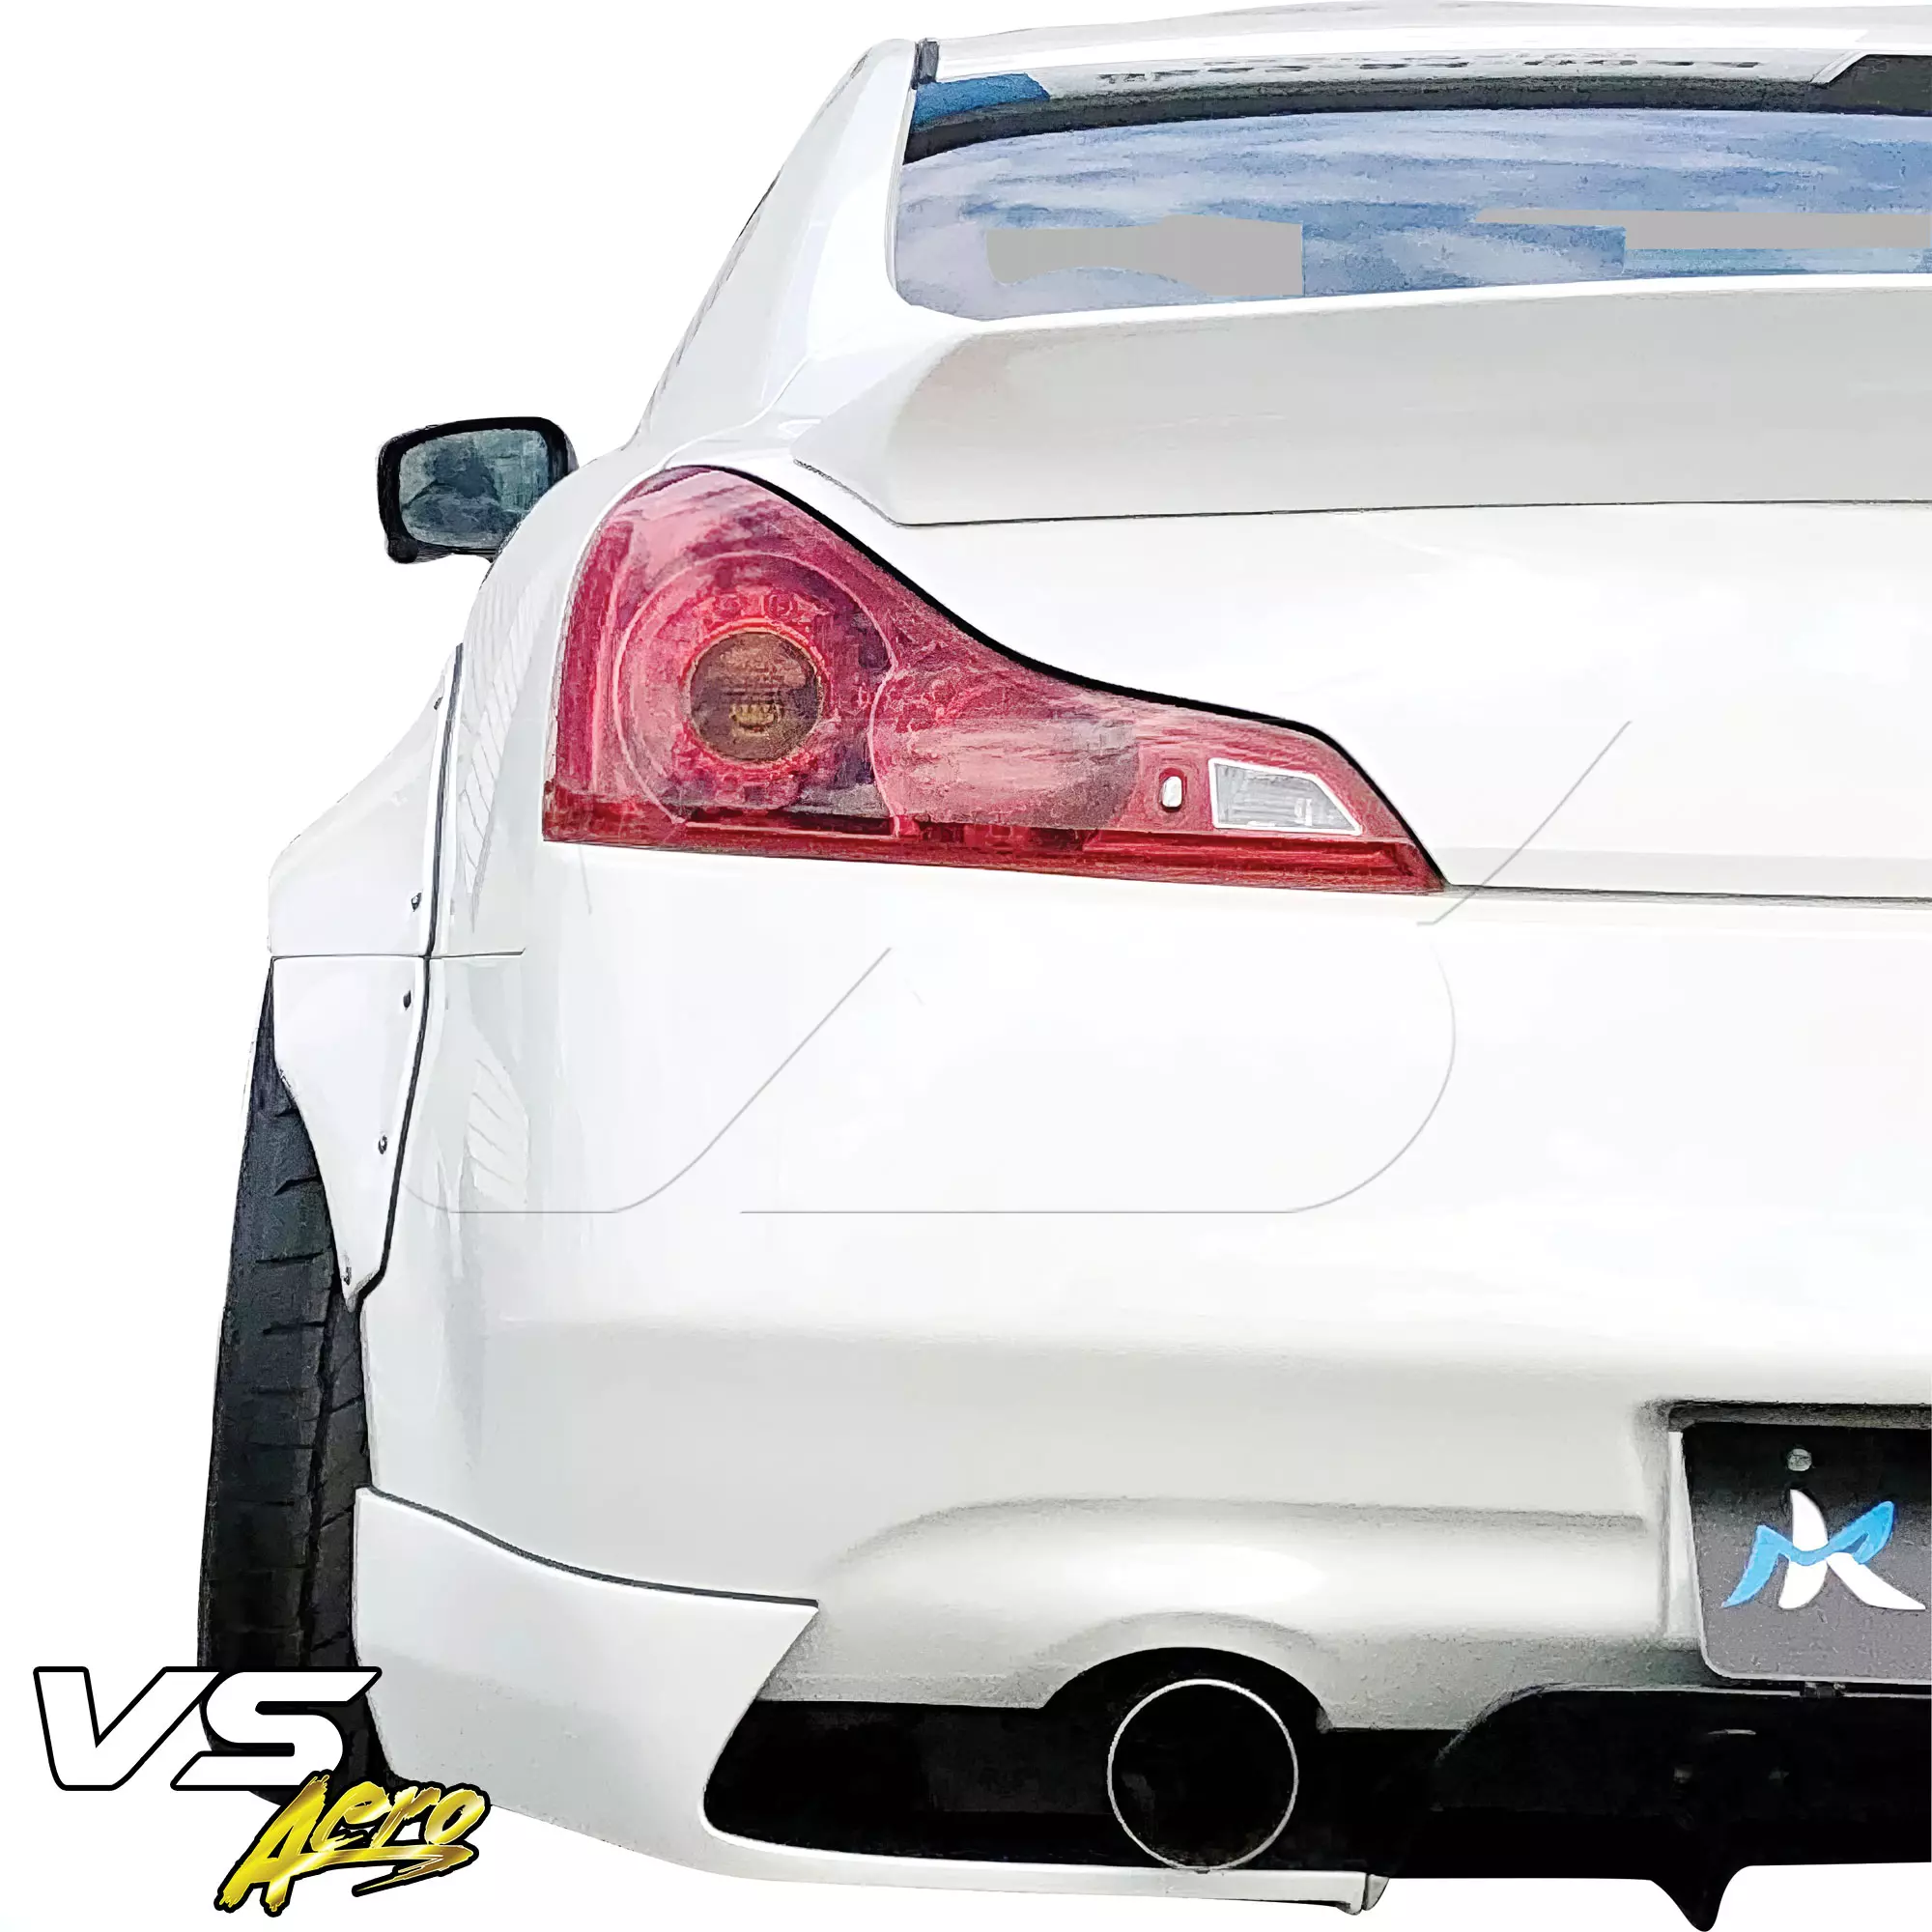 VSaero FRP LBPE Wide Body Fender Flares (rear) 4pc > Infiniti G37 Coupe 2008-2015 > 2dr Coupe - Image 33